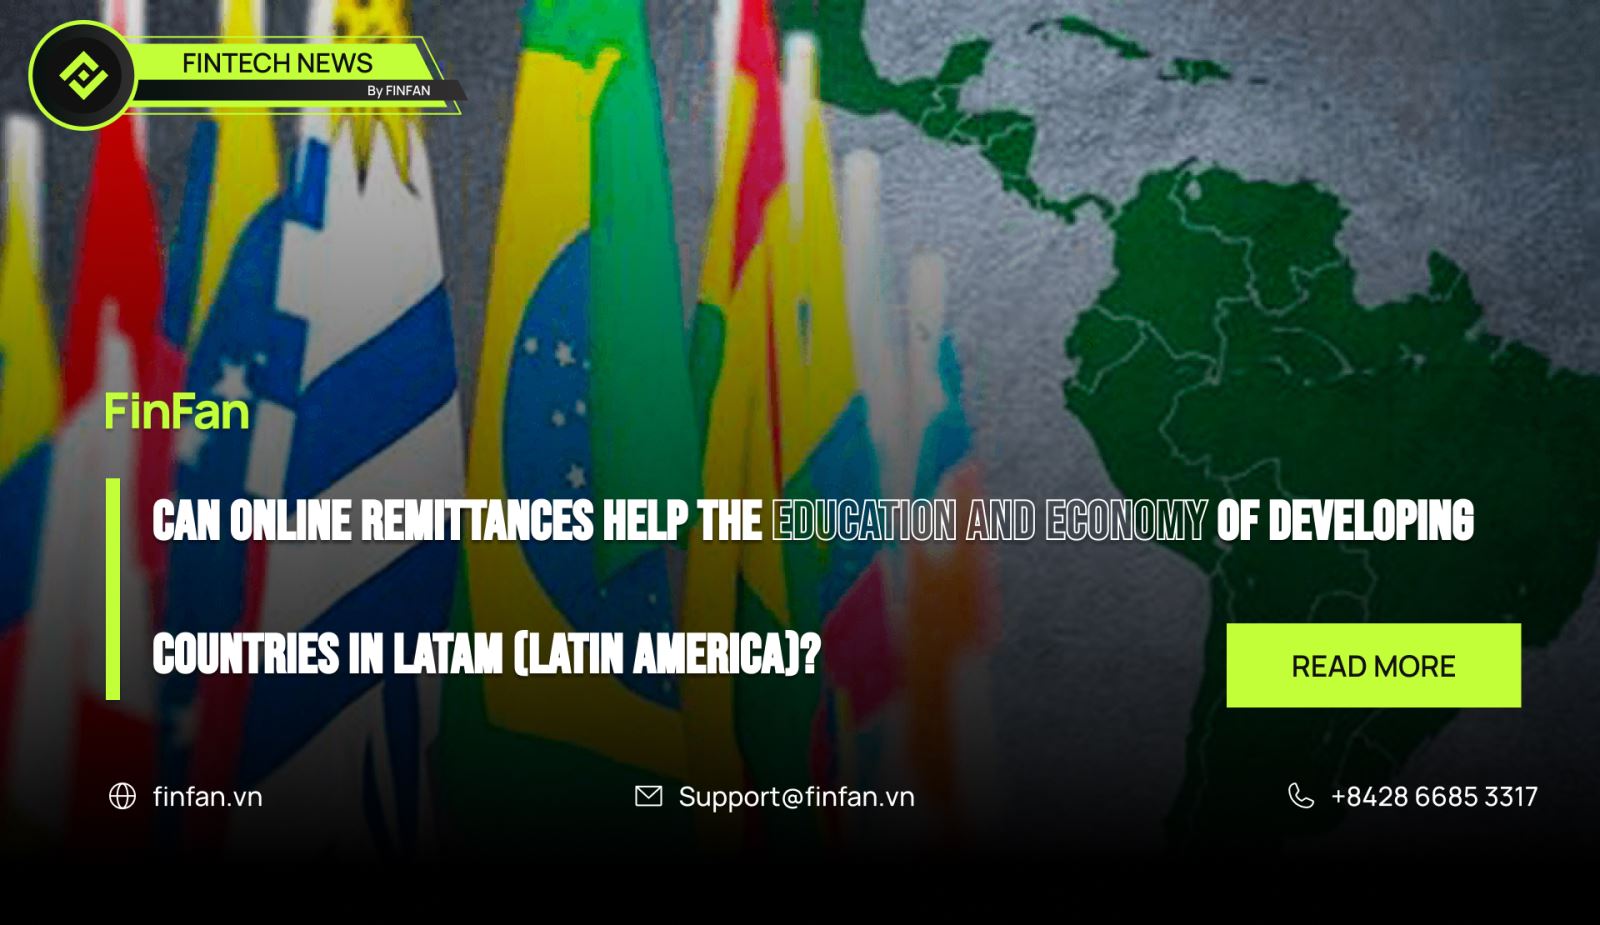 Can online remittances help the education and economy of developing countries in LatAm (Latin America)?